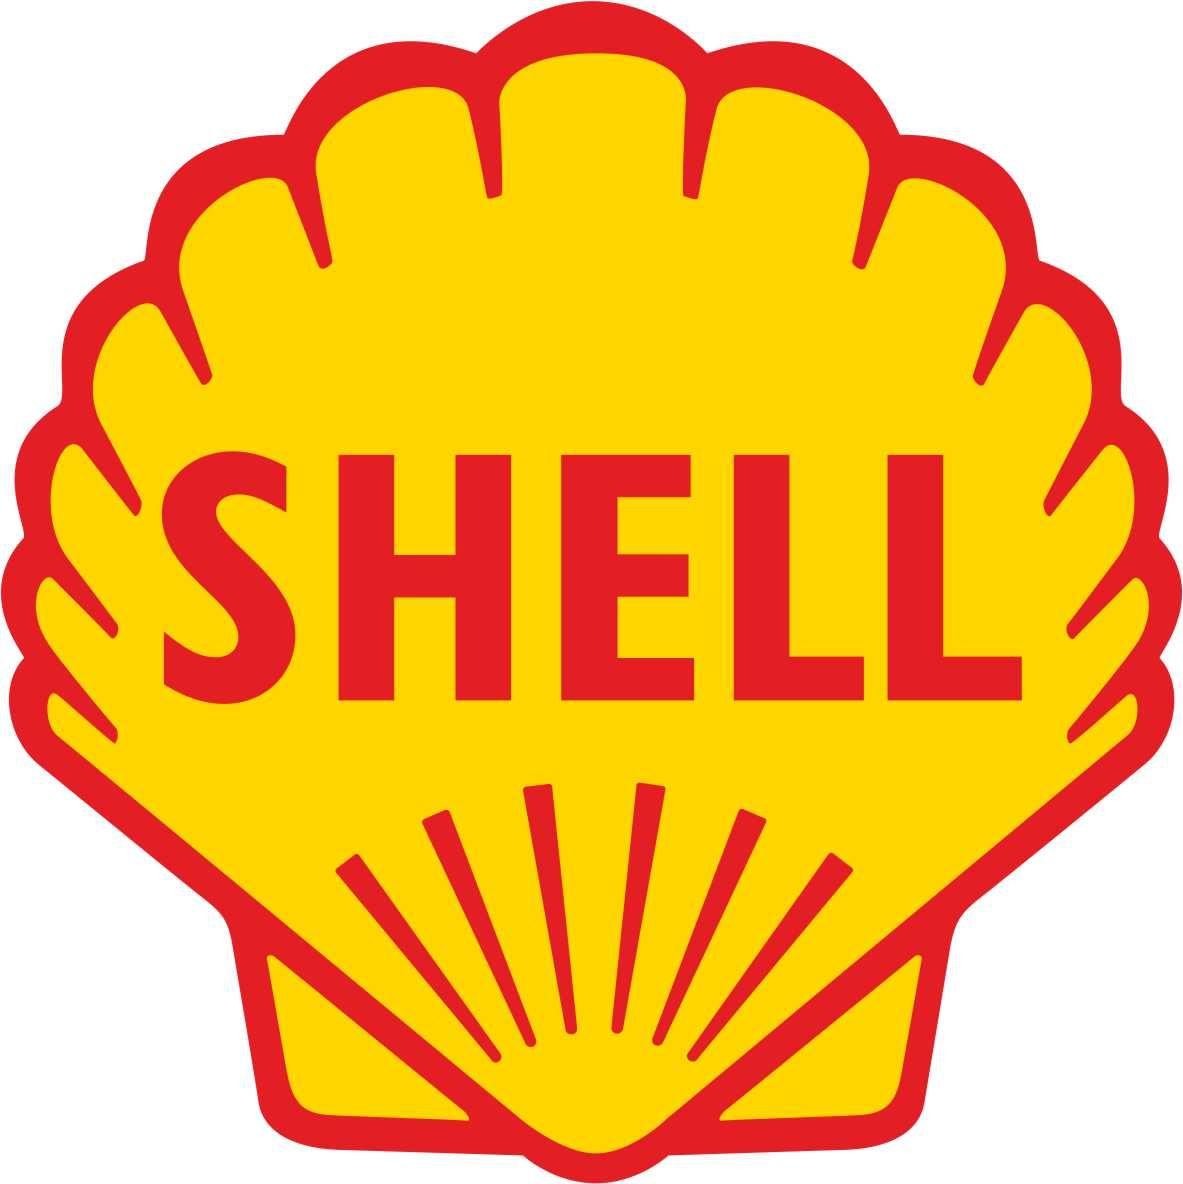 Old Oil Company Logo - Oil Company Logos. Shell Oil Old Logo. Vintage graphics & things